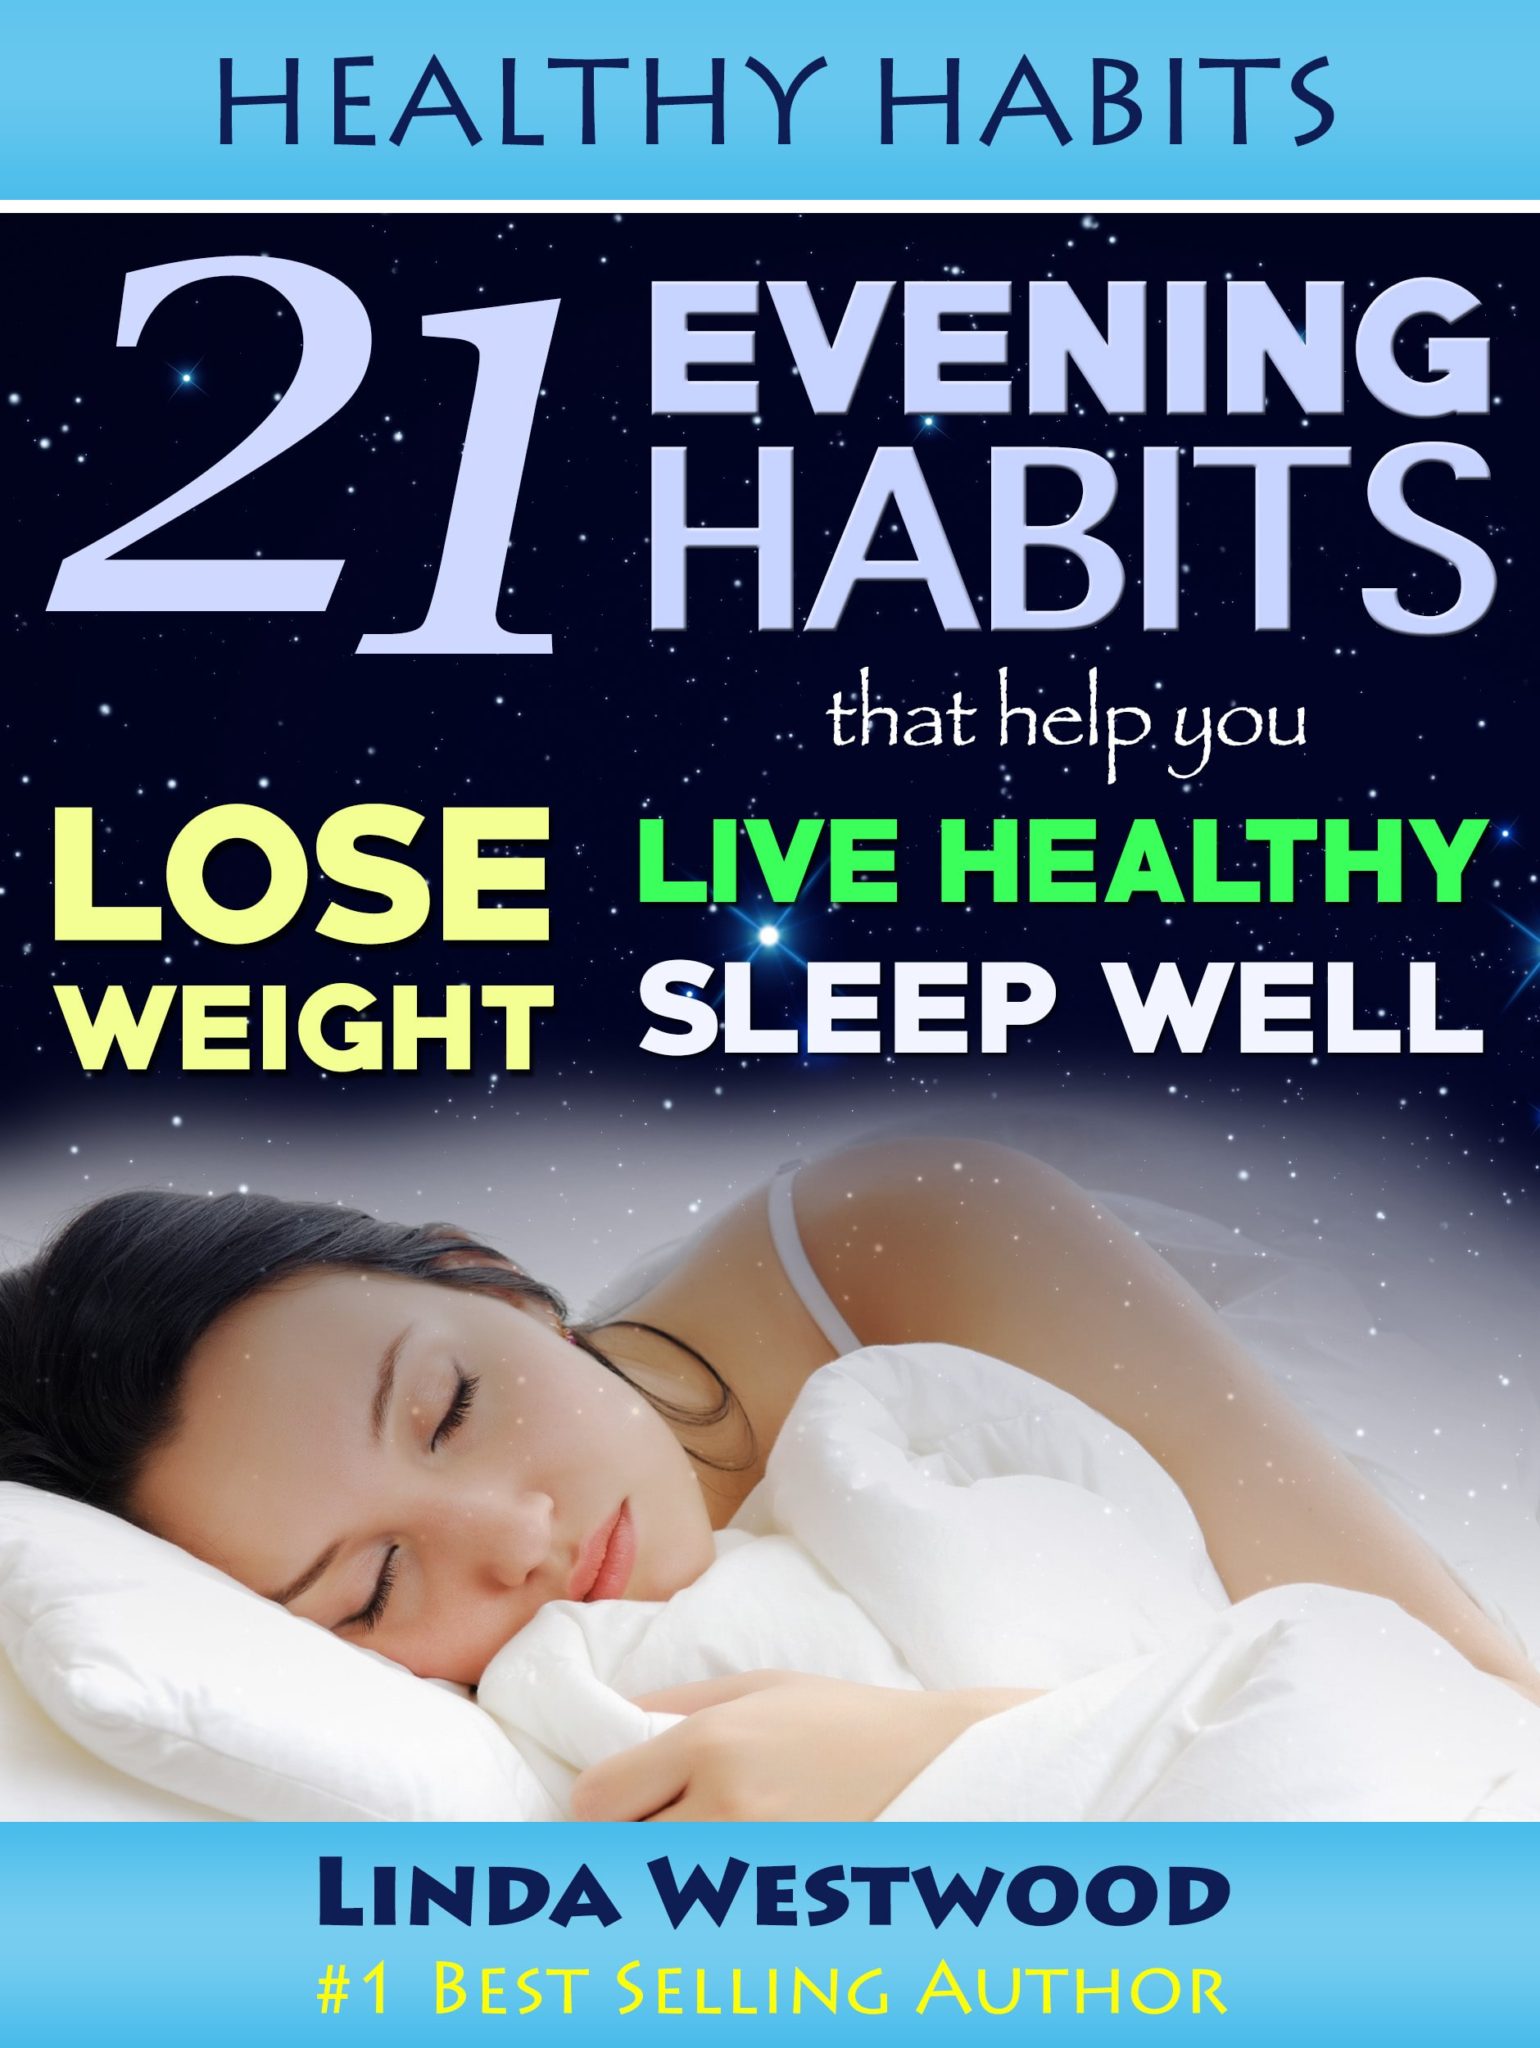 FREE: Healthy Habits: 21 Evening Habits That Help You Lose Weight, Live Healthy & Sleep Well by Linda Westwood